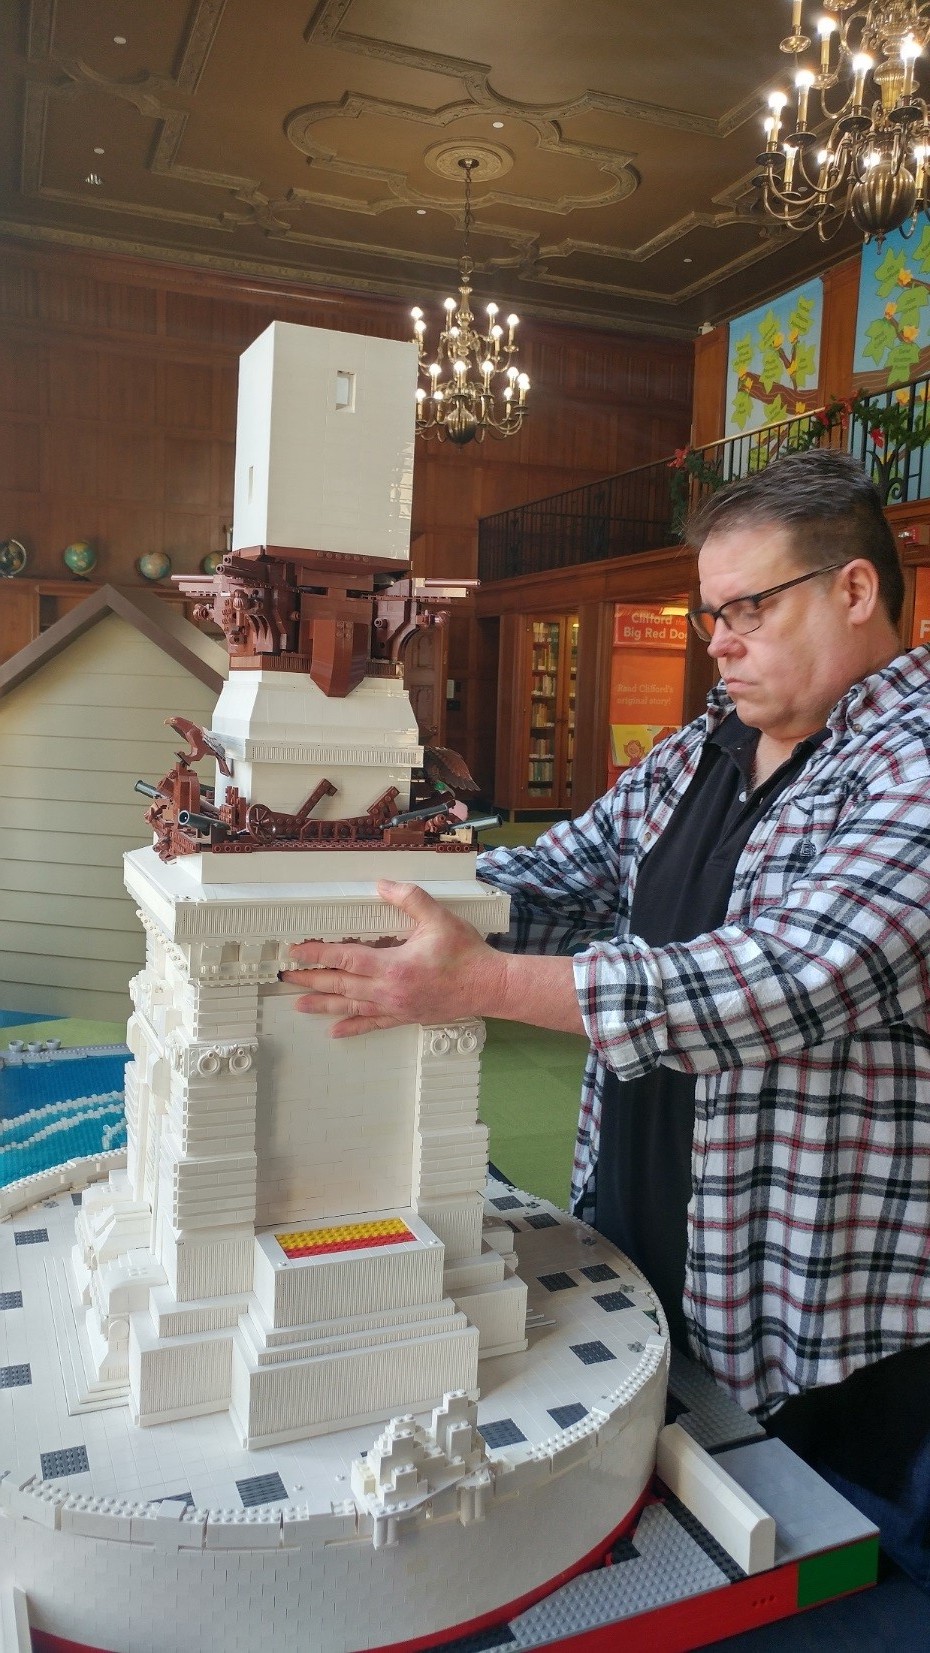 Lego Soldiers and Sailors Monument is installed the Indiana State Library | Indiana State Library